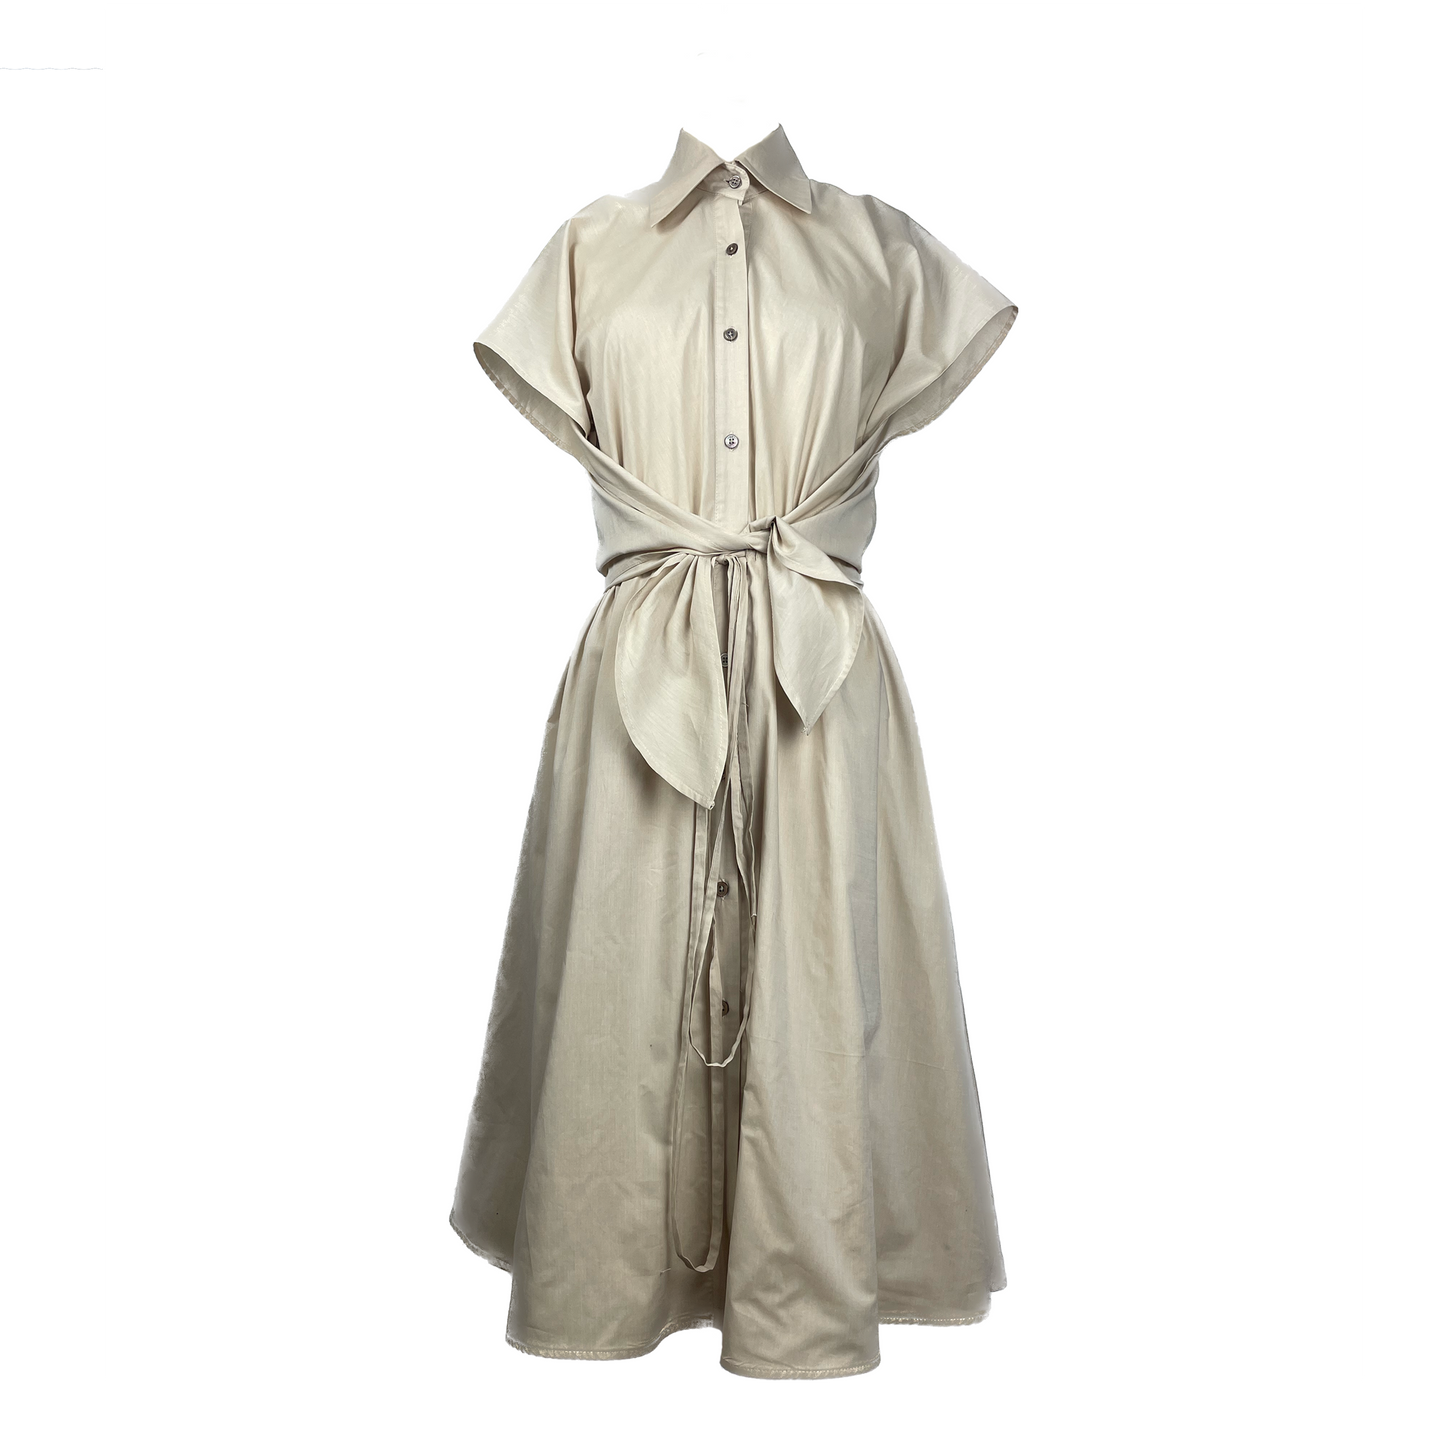 Cotton soft sage dress with button detailing and adjustable waist